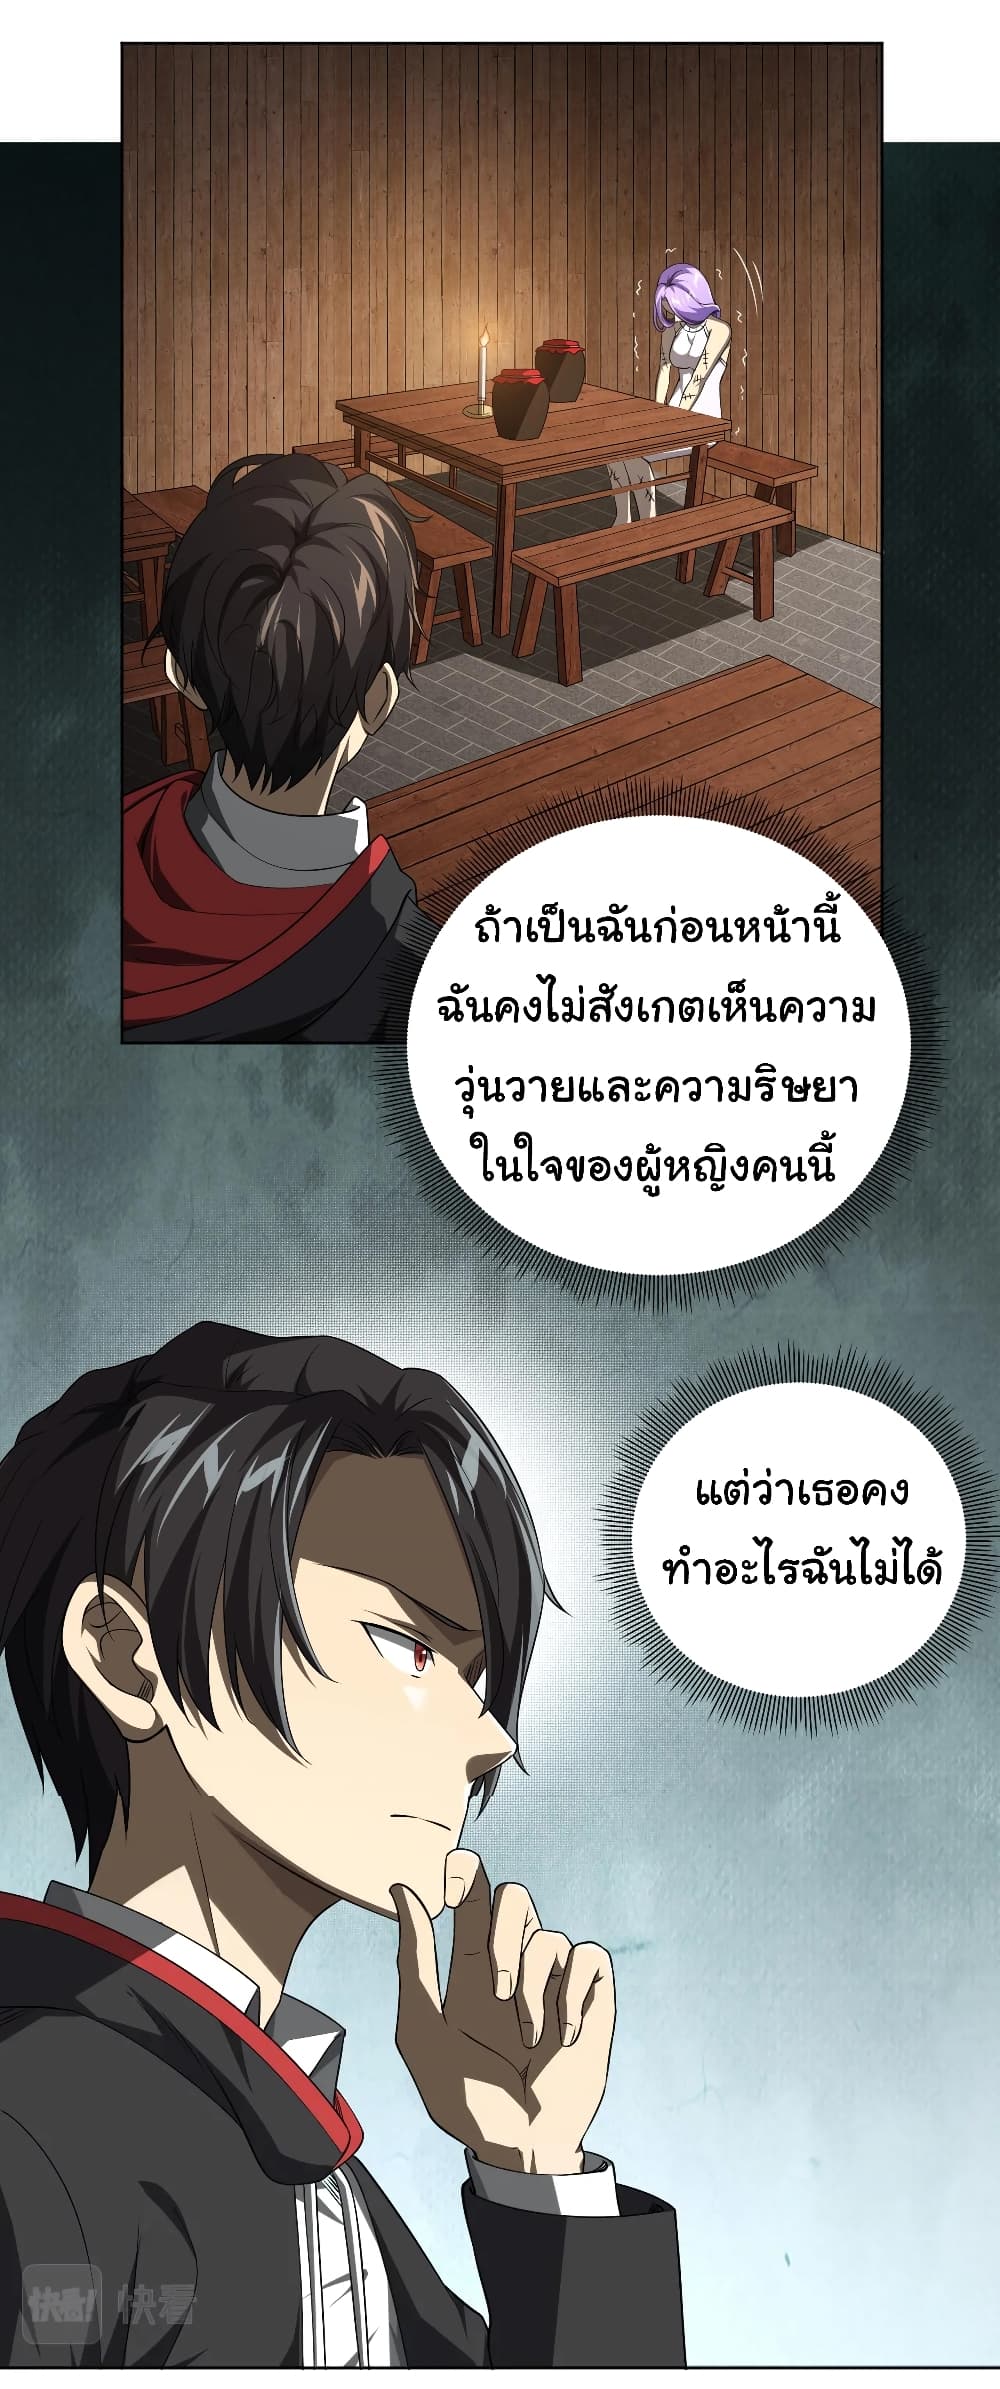 Start with Trillions of Coins ตอนที่ 5 (11)